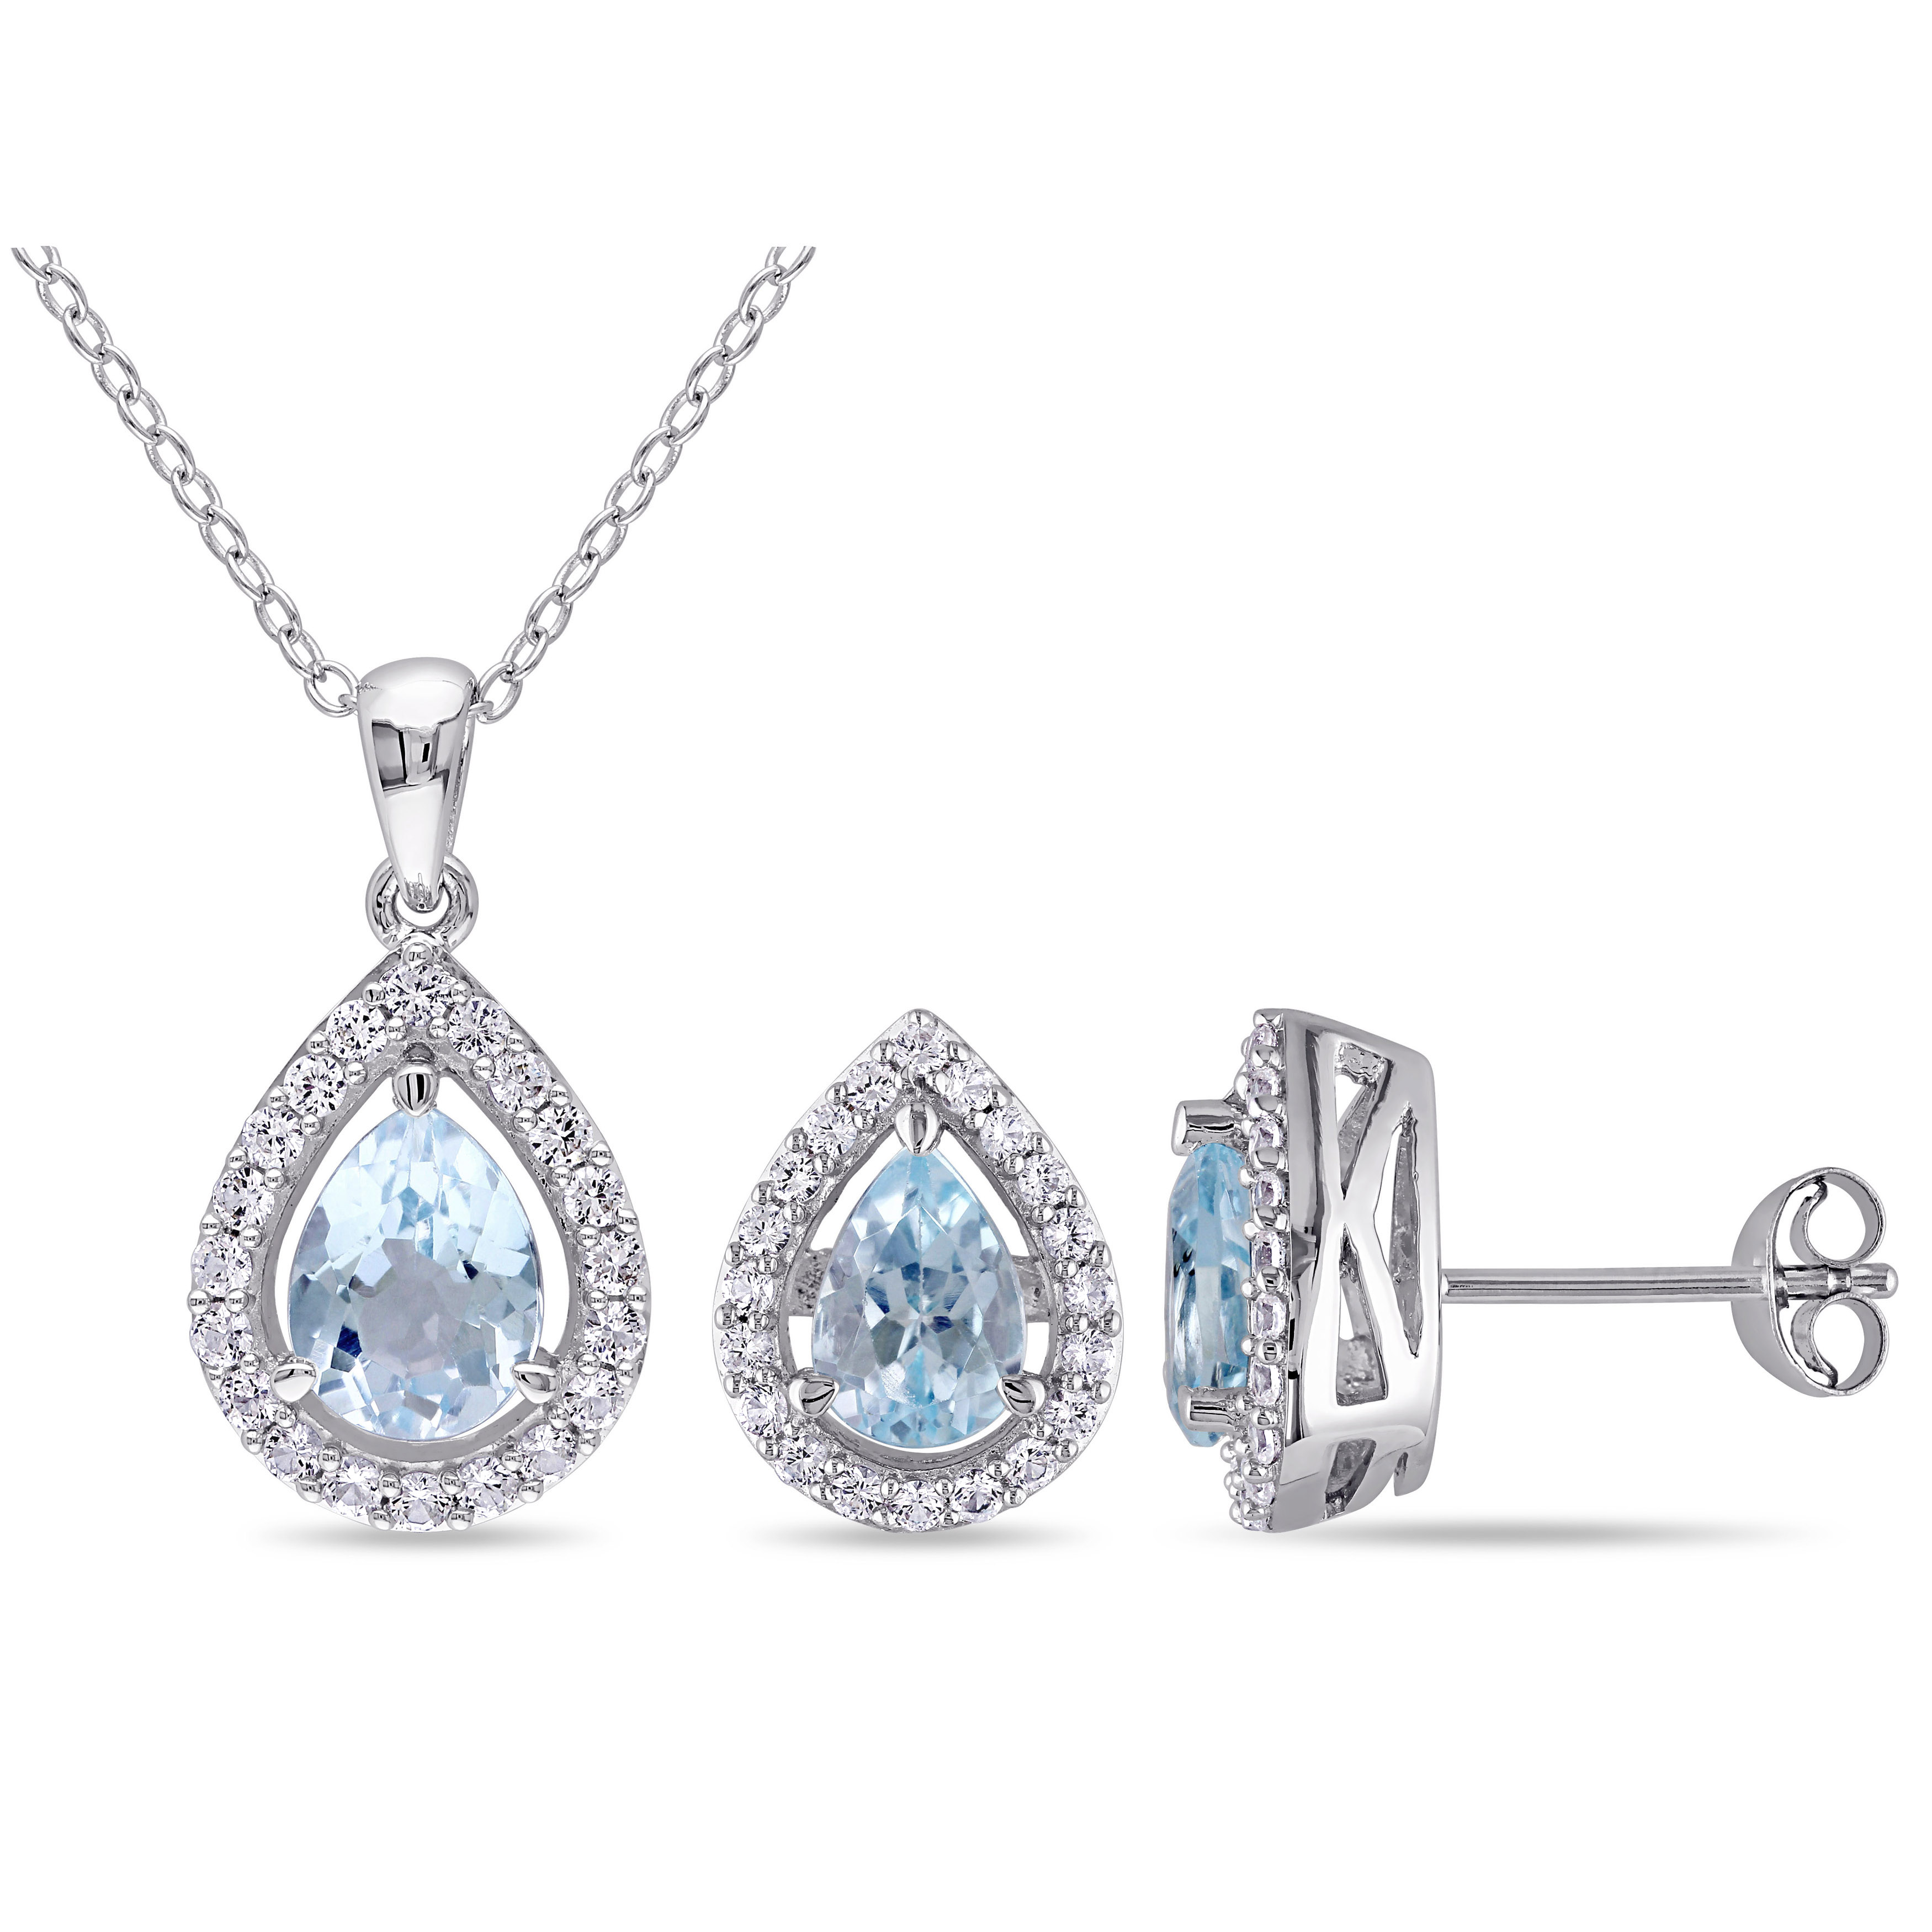 3 7/8 CT TGW Blue Topaz - Sky Created White Sapphire Set With Chain in Sterling Silver